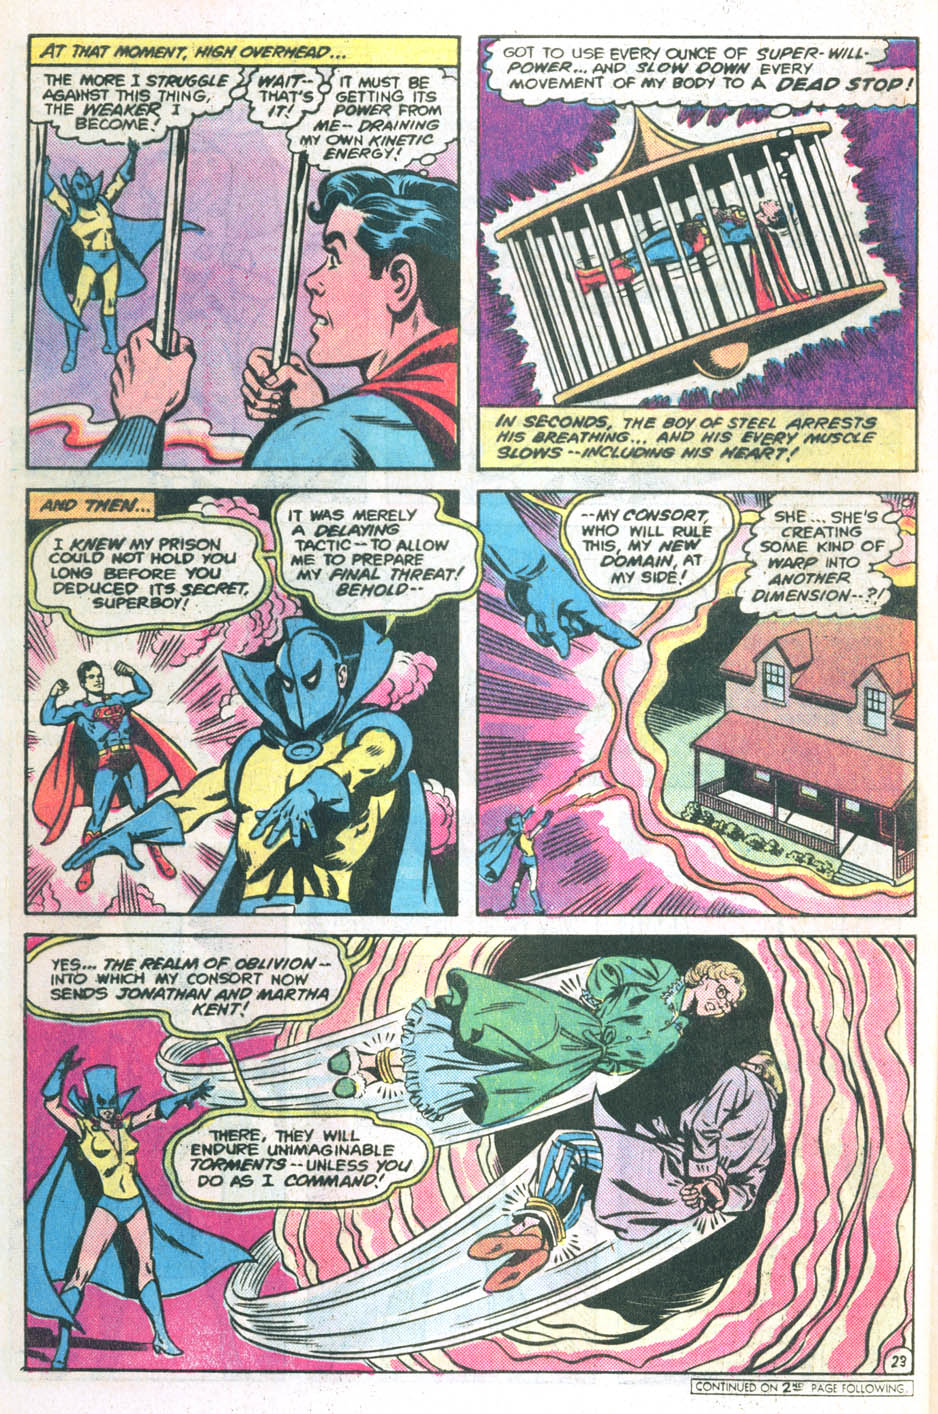 The New Adventures of Superboy 25 Page 23